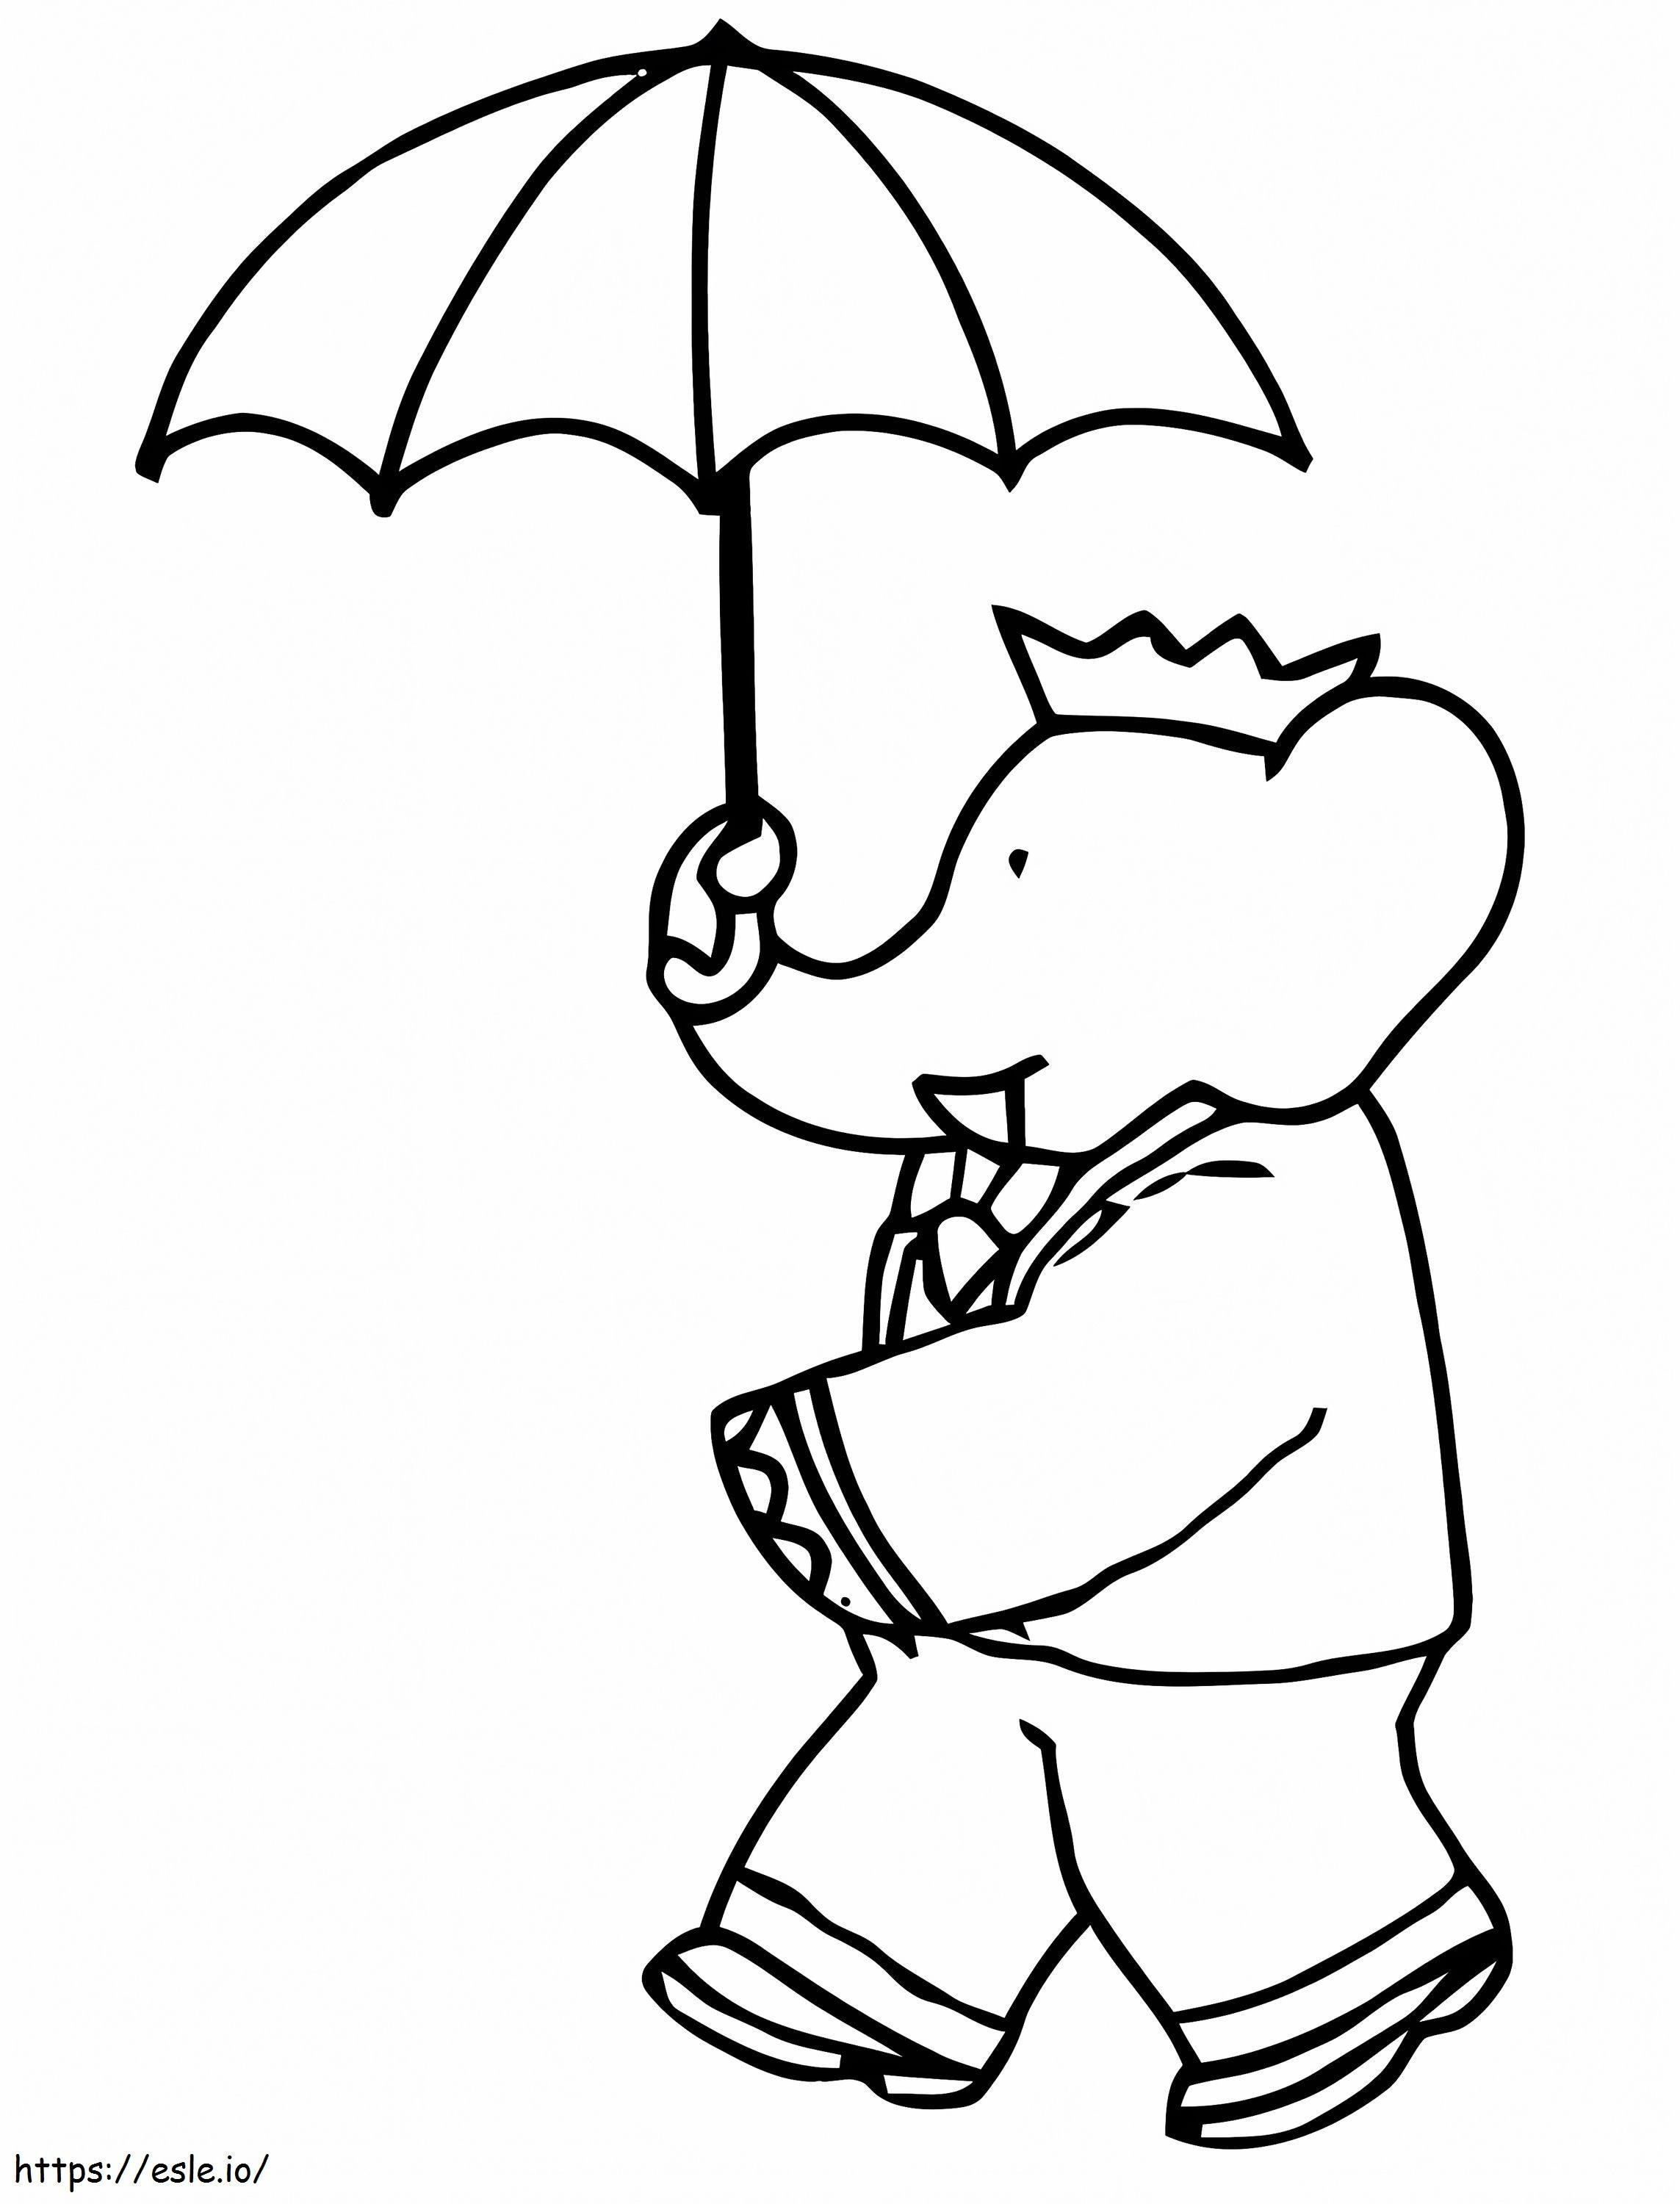 1581044243 Coloring For Kids Babar 64233 coloring page